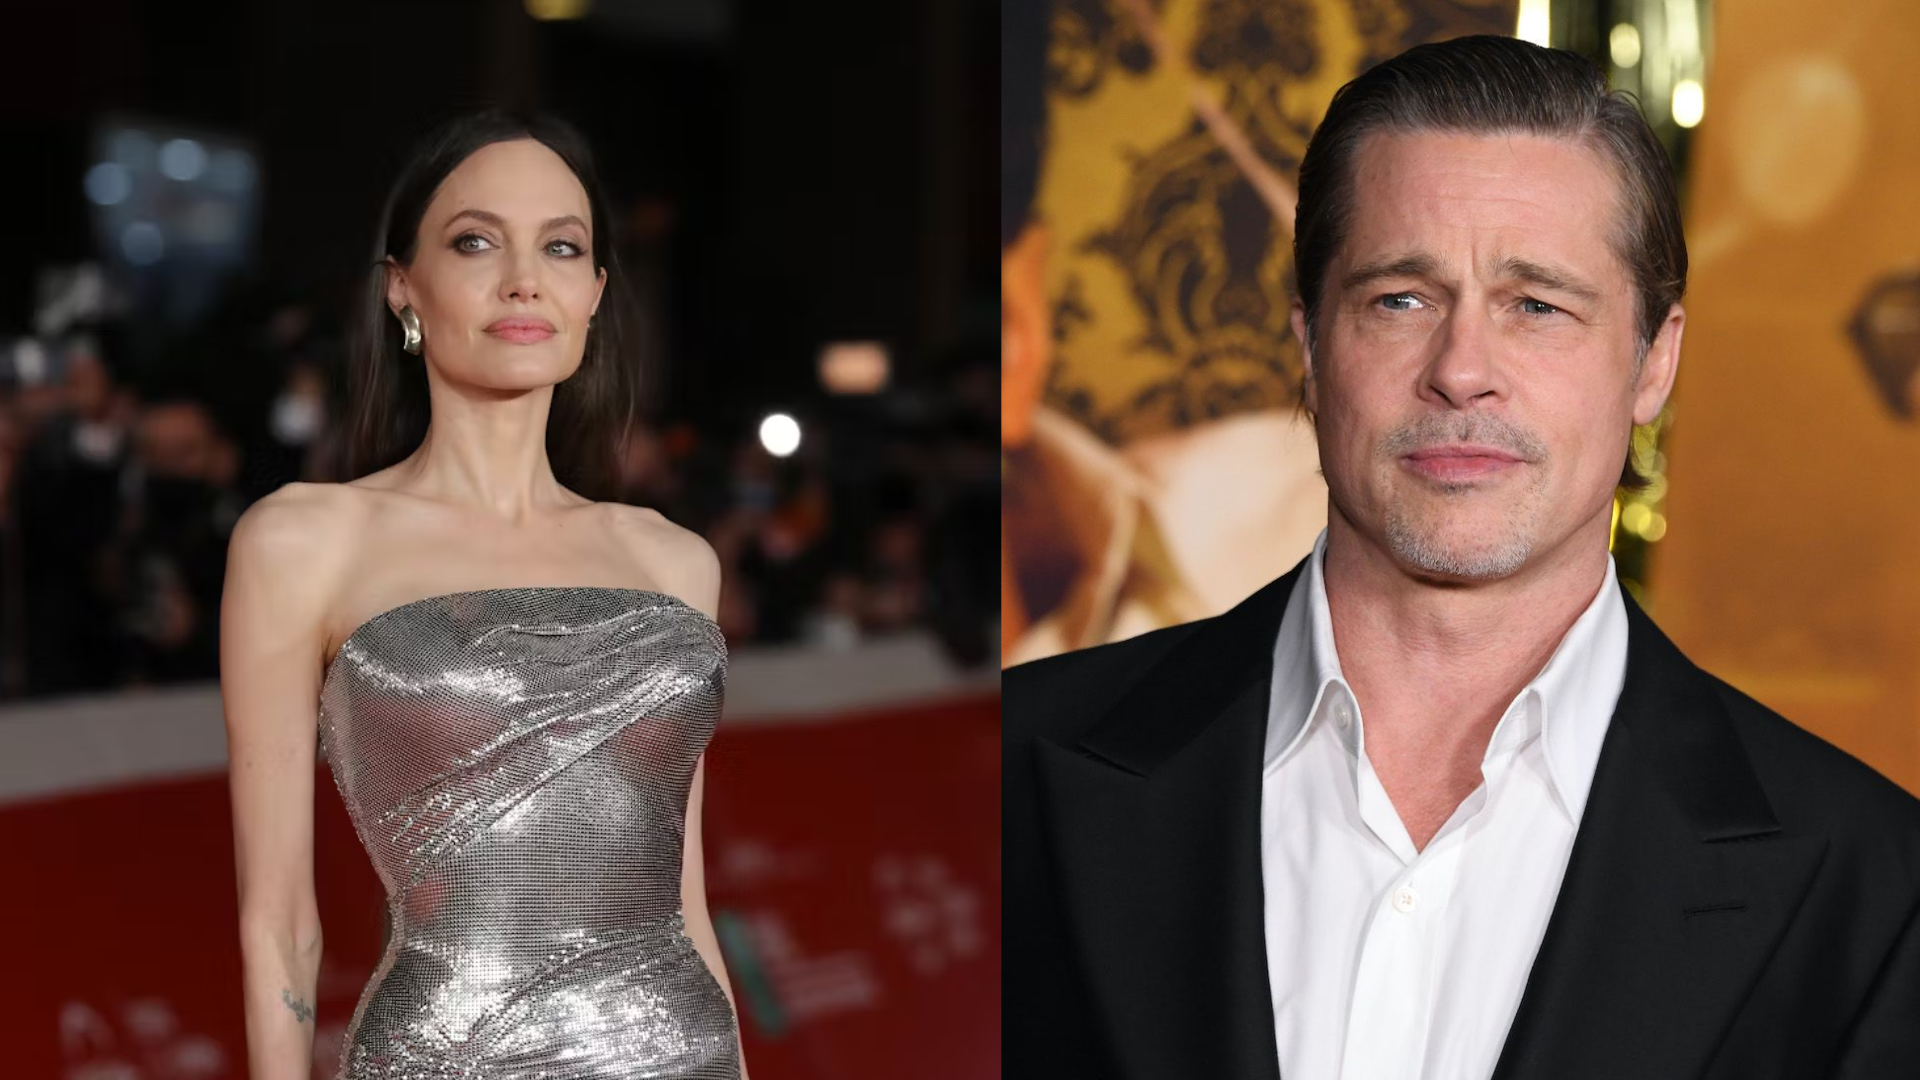 Security Guard Claims: Angelina Jolie Reportedly Advised Children To ‘Limit Time’ With Brad Pitt